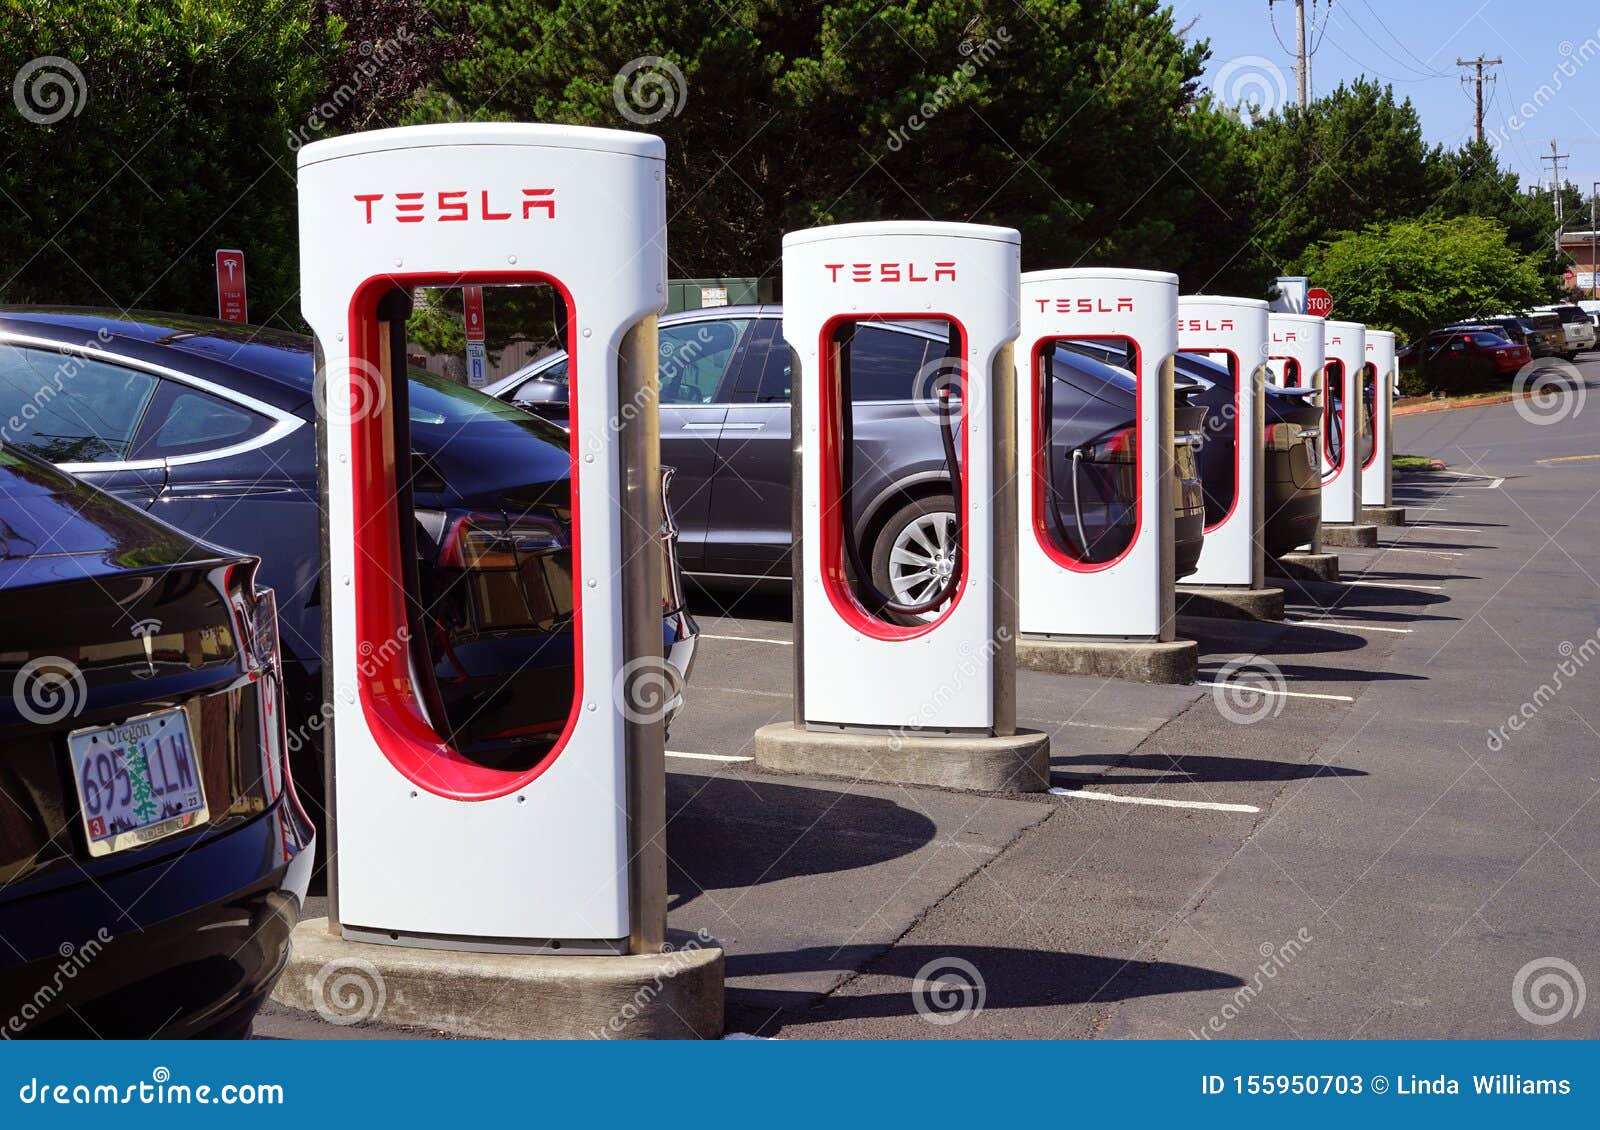 tesla-charging-stations-are-always-in-use-editorial-stock-photo-image